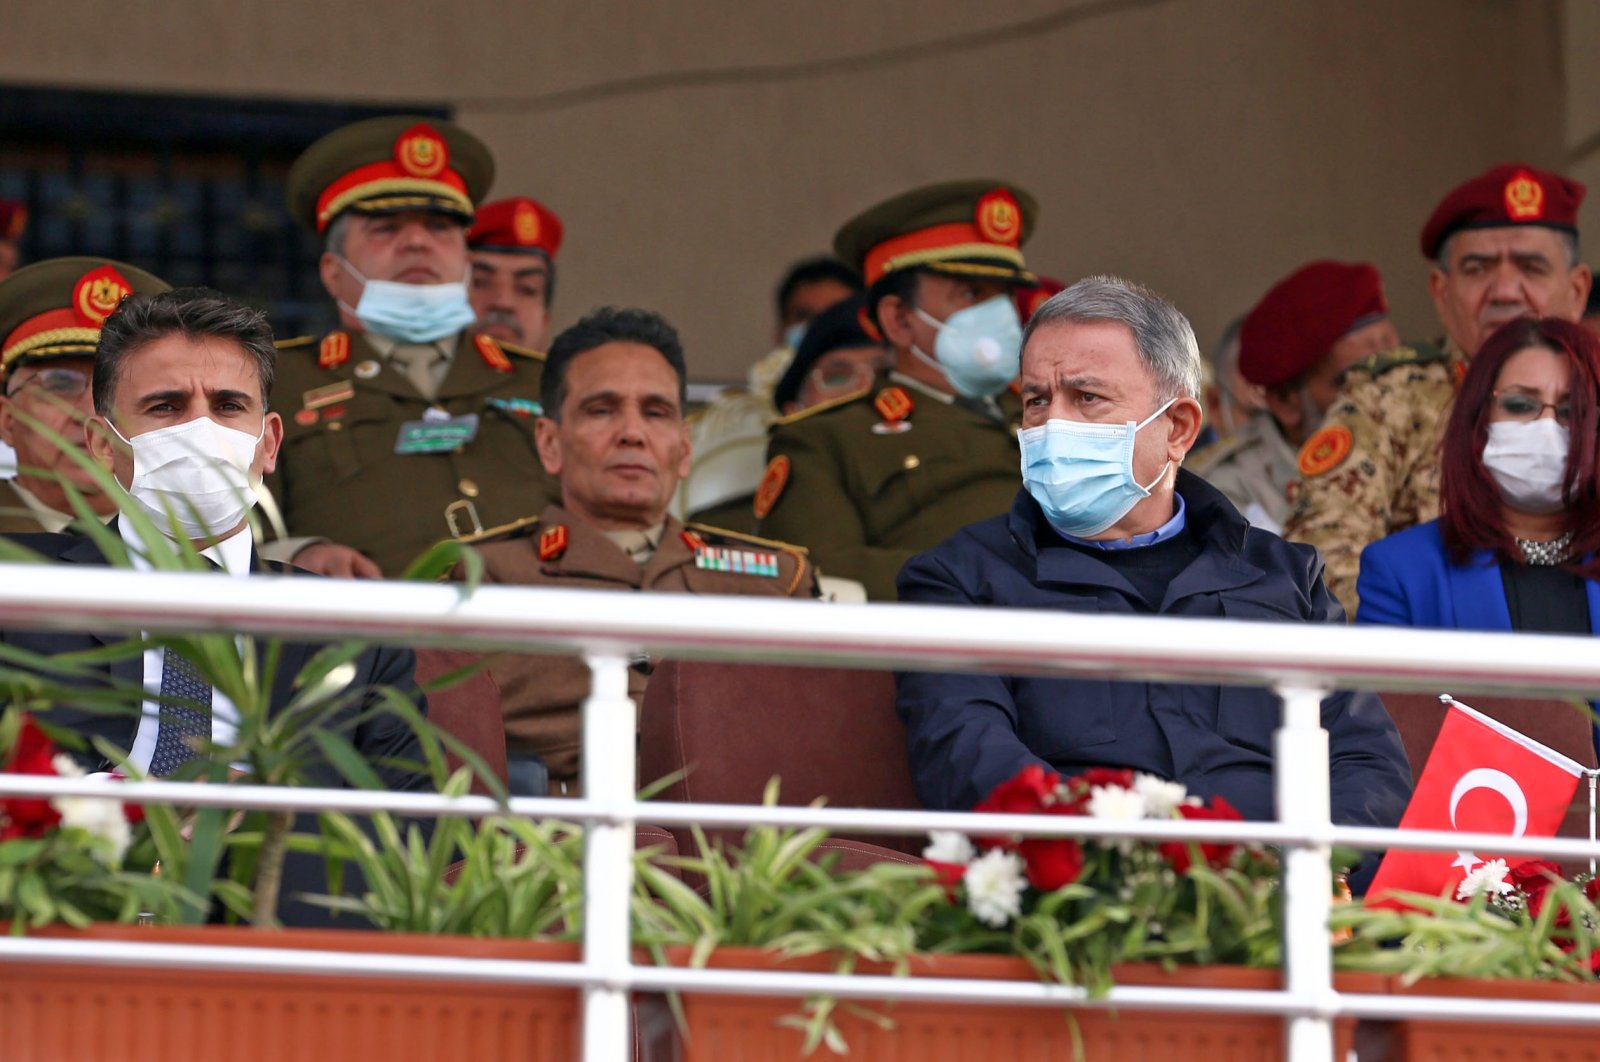 Turkish Minister of Defence Hulusi Akar (R) and his Libyan counterpart Salahaddin Namroush (L) attend a graduation ceremony for new batches of students from the Military College in the Libyan capital Tripoli, Libya, Dec. 26, 2020. (AFP Photo)